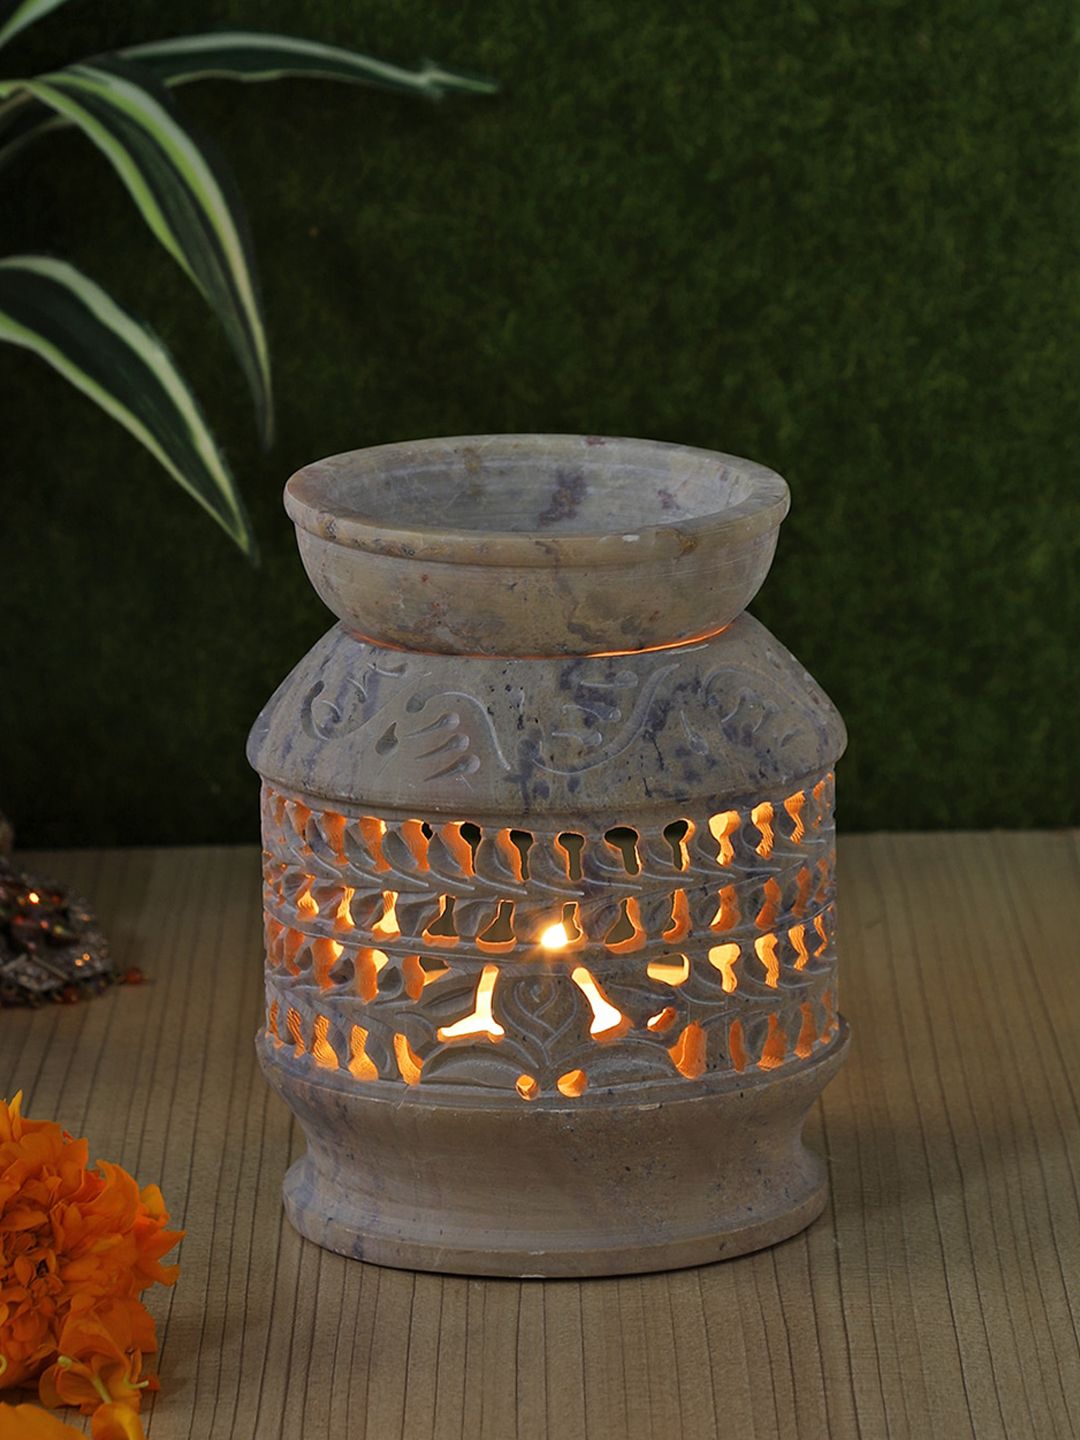 Aapno Rajasthan Cream Coloured & Grey Stone Oil Diffuser Price in India